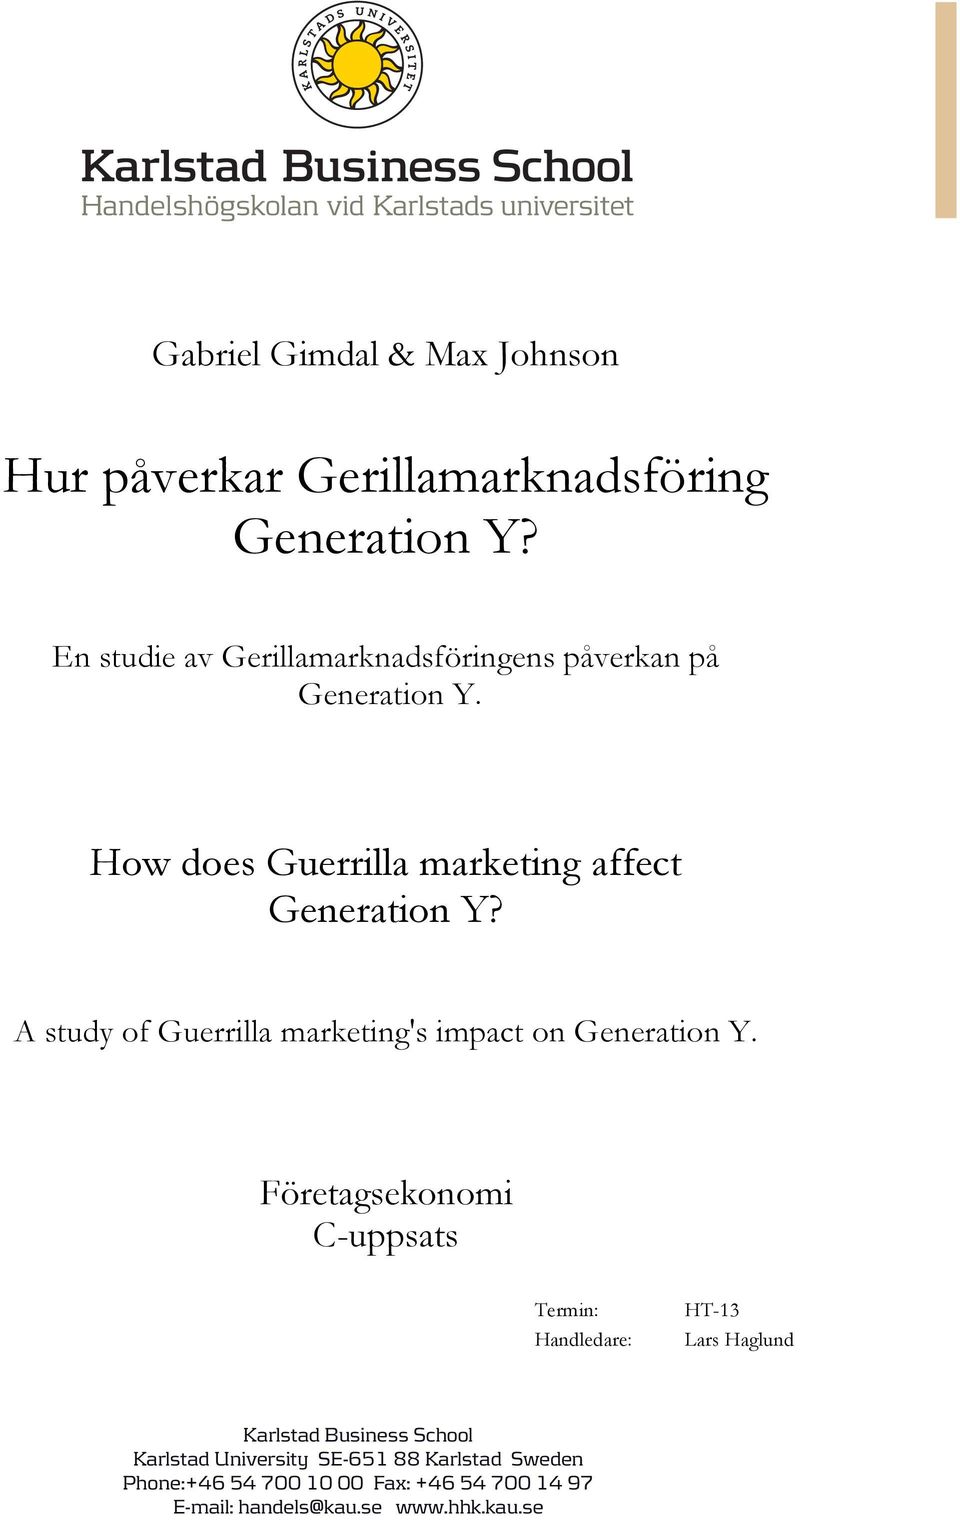 A study of Guerrilla marketing's impact on Generation Y.